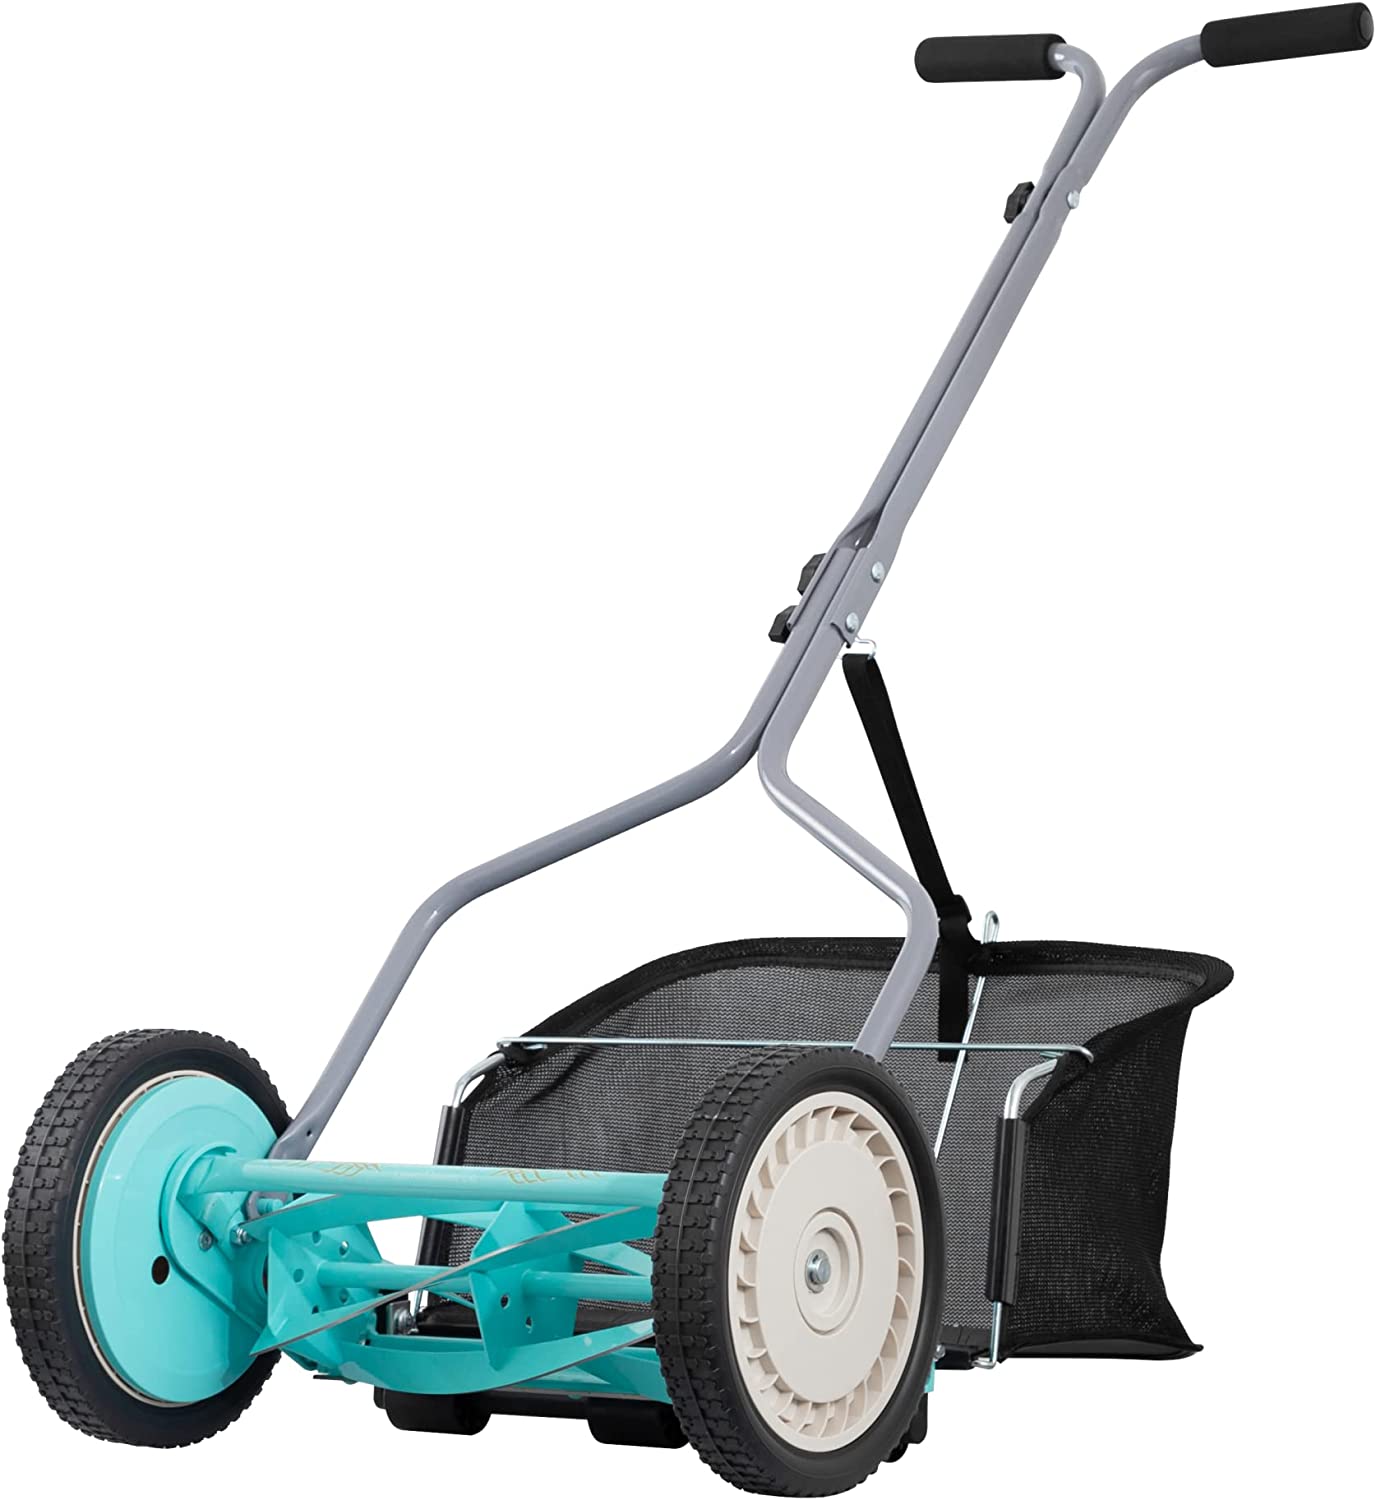 American Lawn Mower Company 1304-14GC 14-Inch 5-Blade Push Reel Lawn Mower with Grass Catcher， Mint